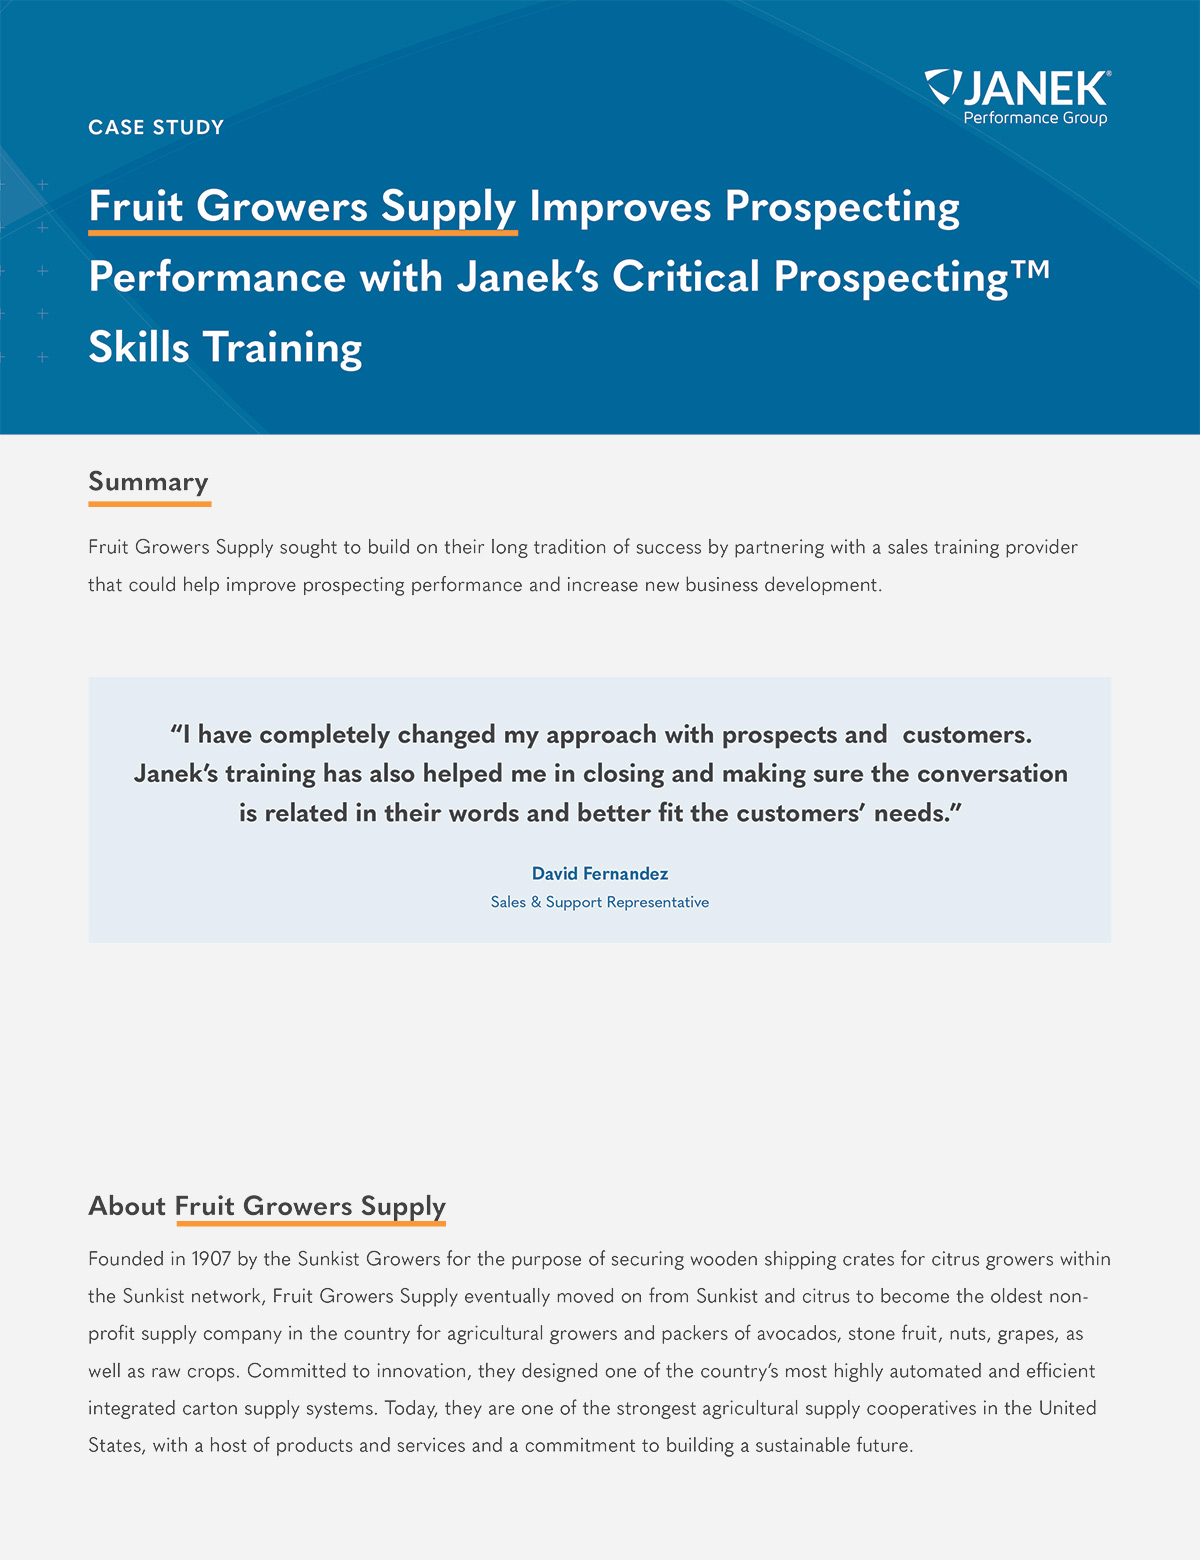 Fruit Growers Supply Case Study